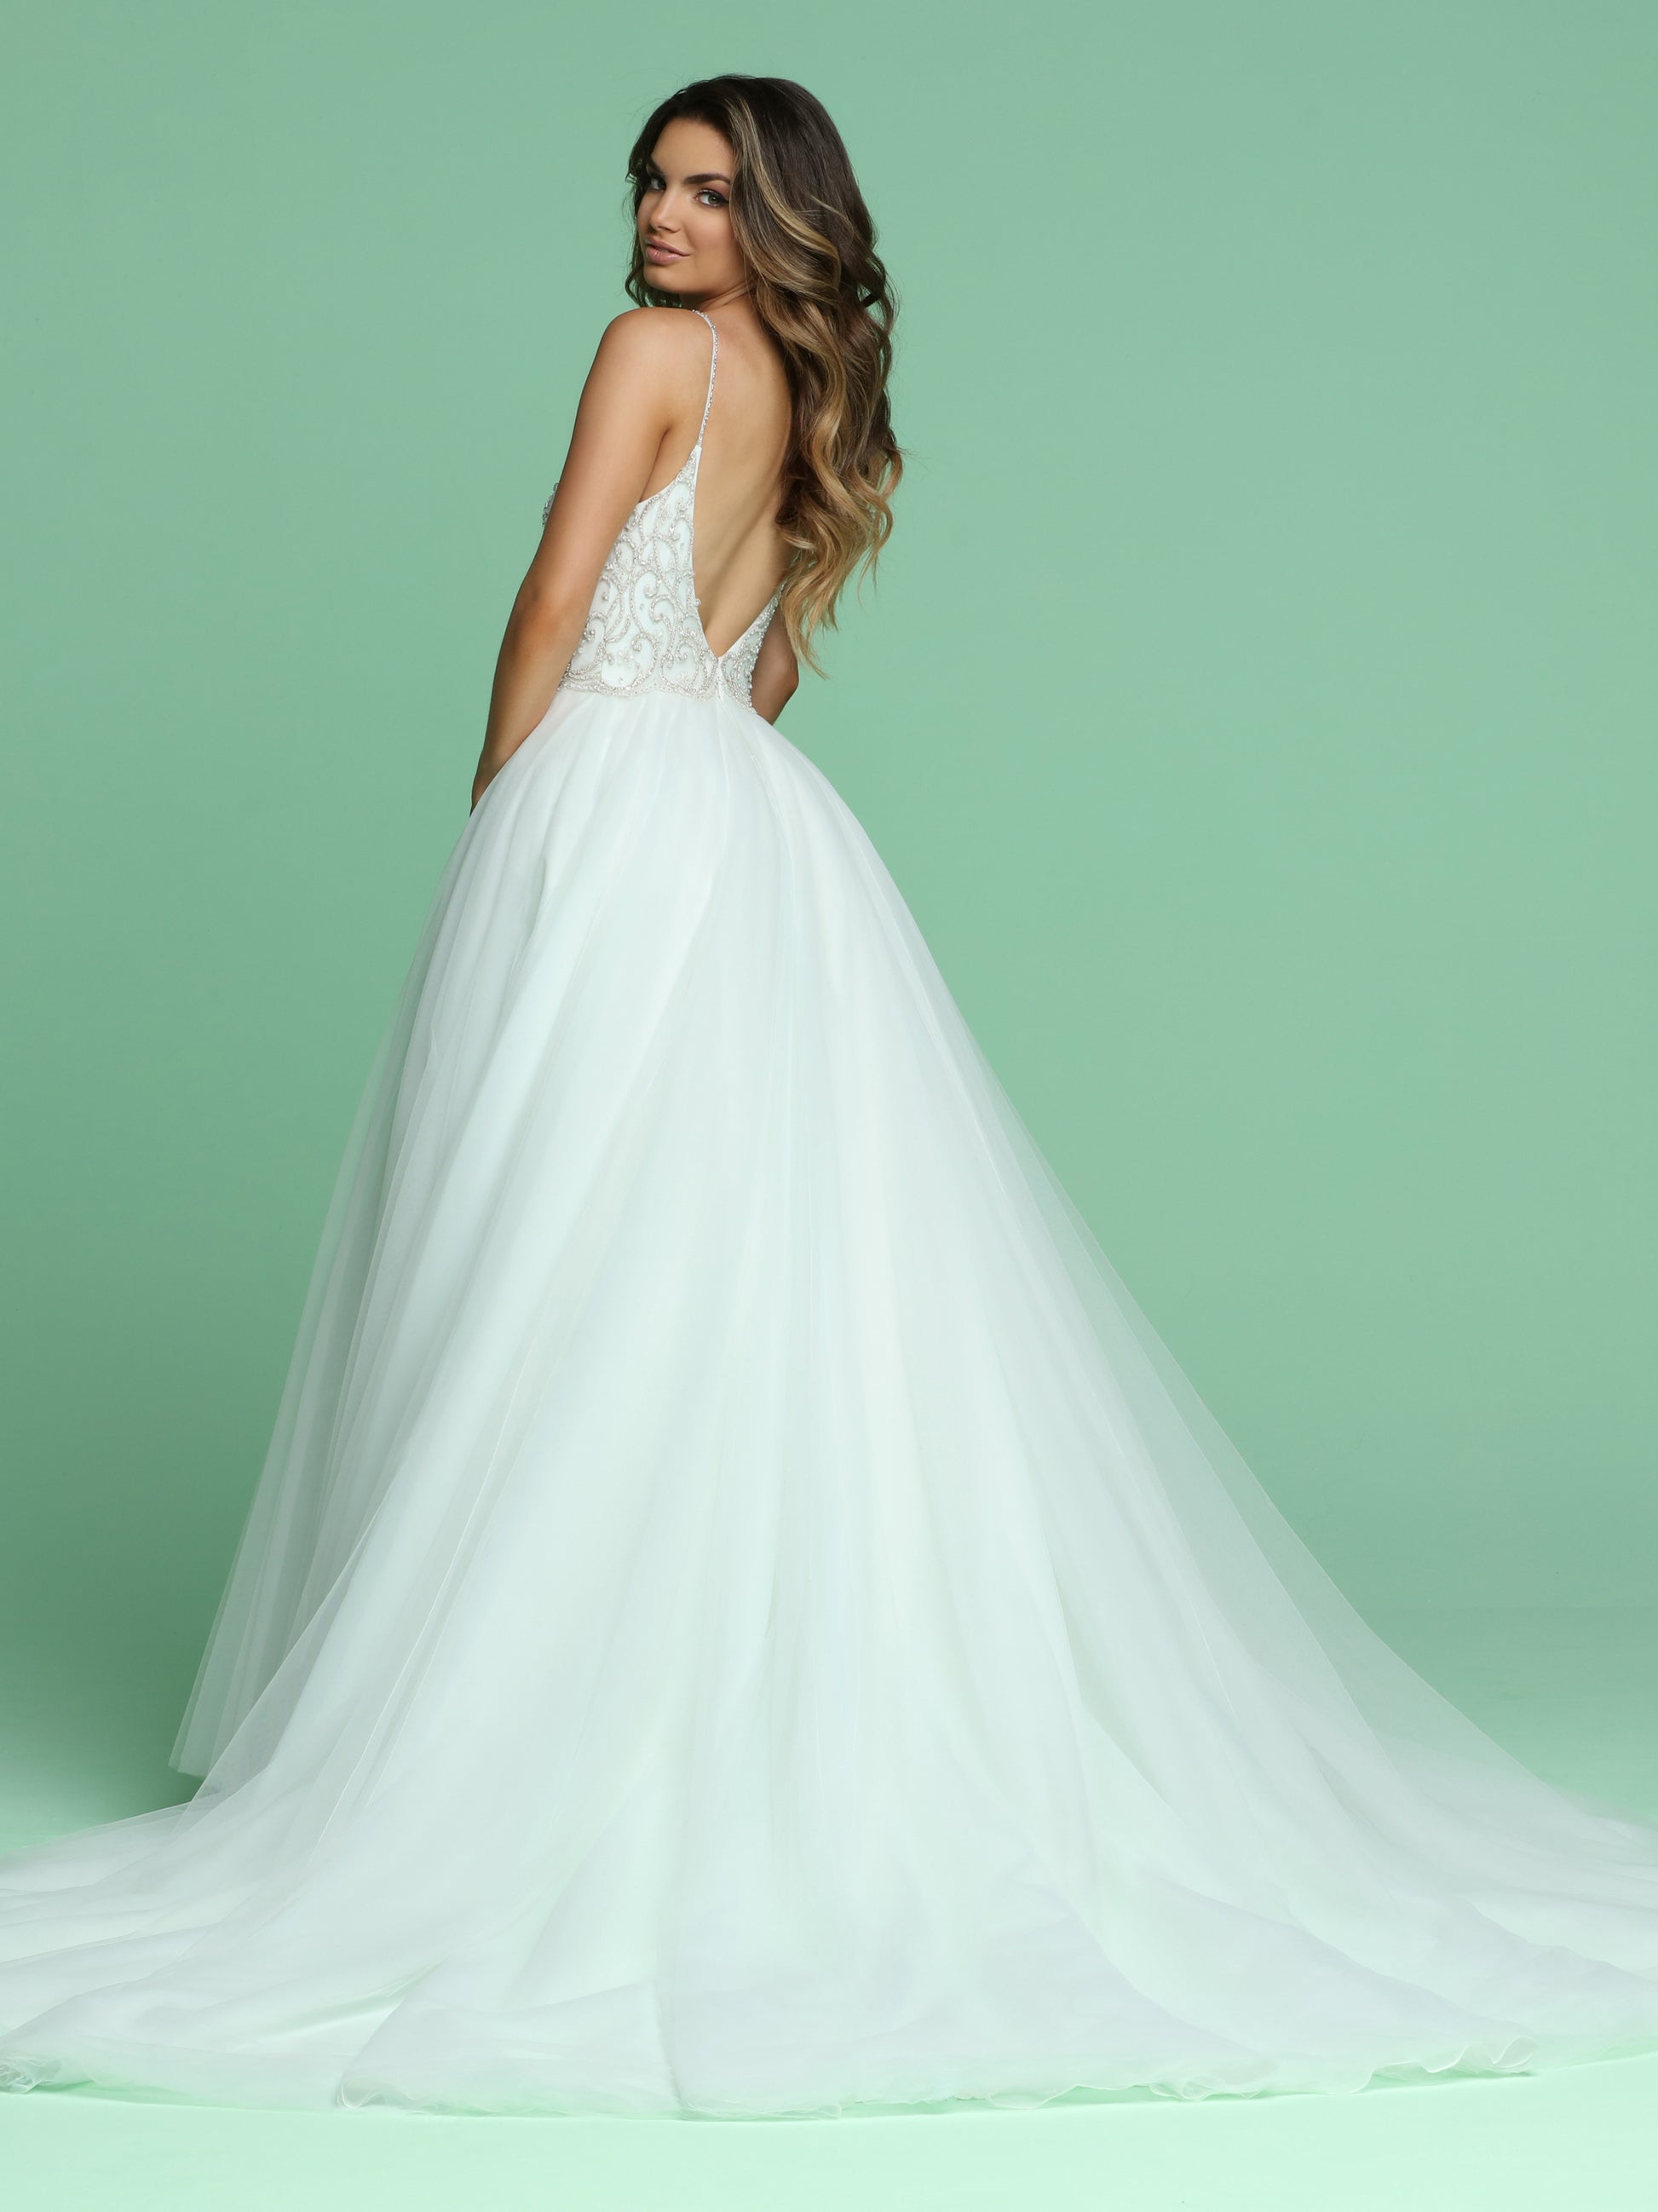 Davinci Bridal 50603 is a stunning Lush A Line Wedding Dress Featuring an Embellished V neckline with spaghetti straps leading to an open back. Lush Layers of Tulle in the Ballgown skirt flow into a sweeping train.   Available for 1-2 Week Delivery!!!  Available Sizes: 2,4,6,8,10,12,14,16,18,20  Available Colors: Ivory/Blue, Ivory/Ivory